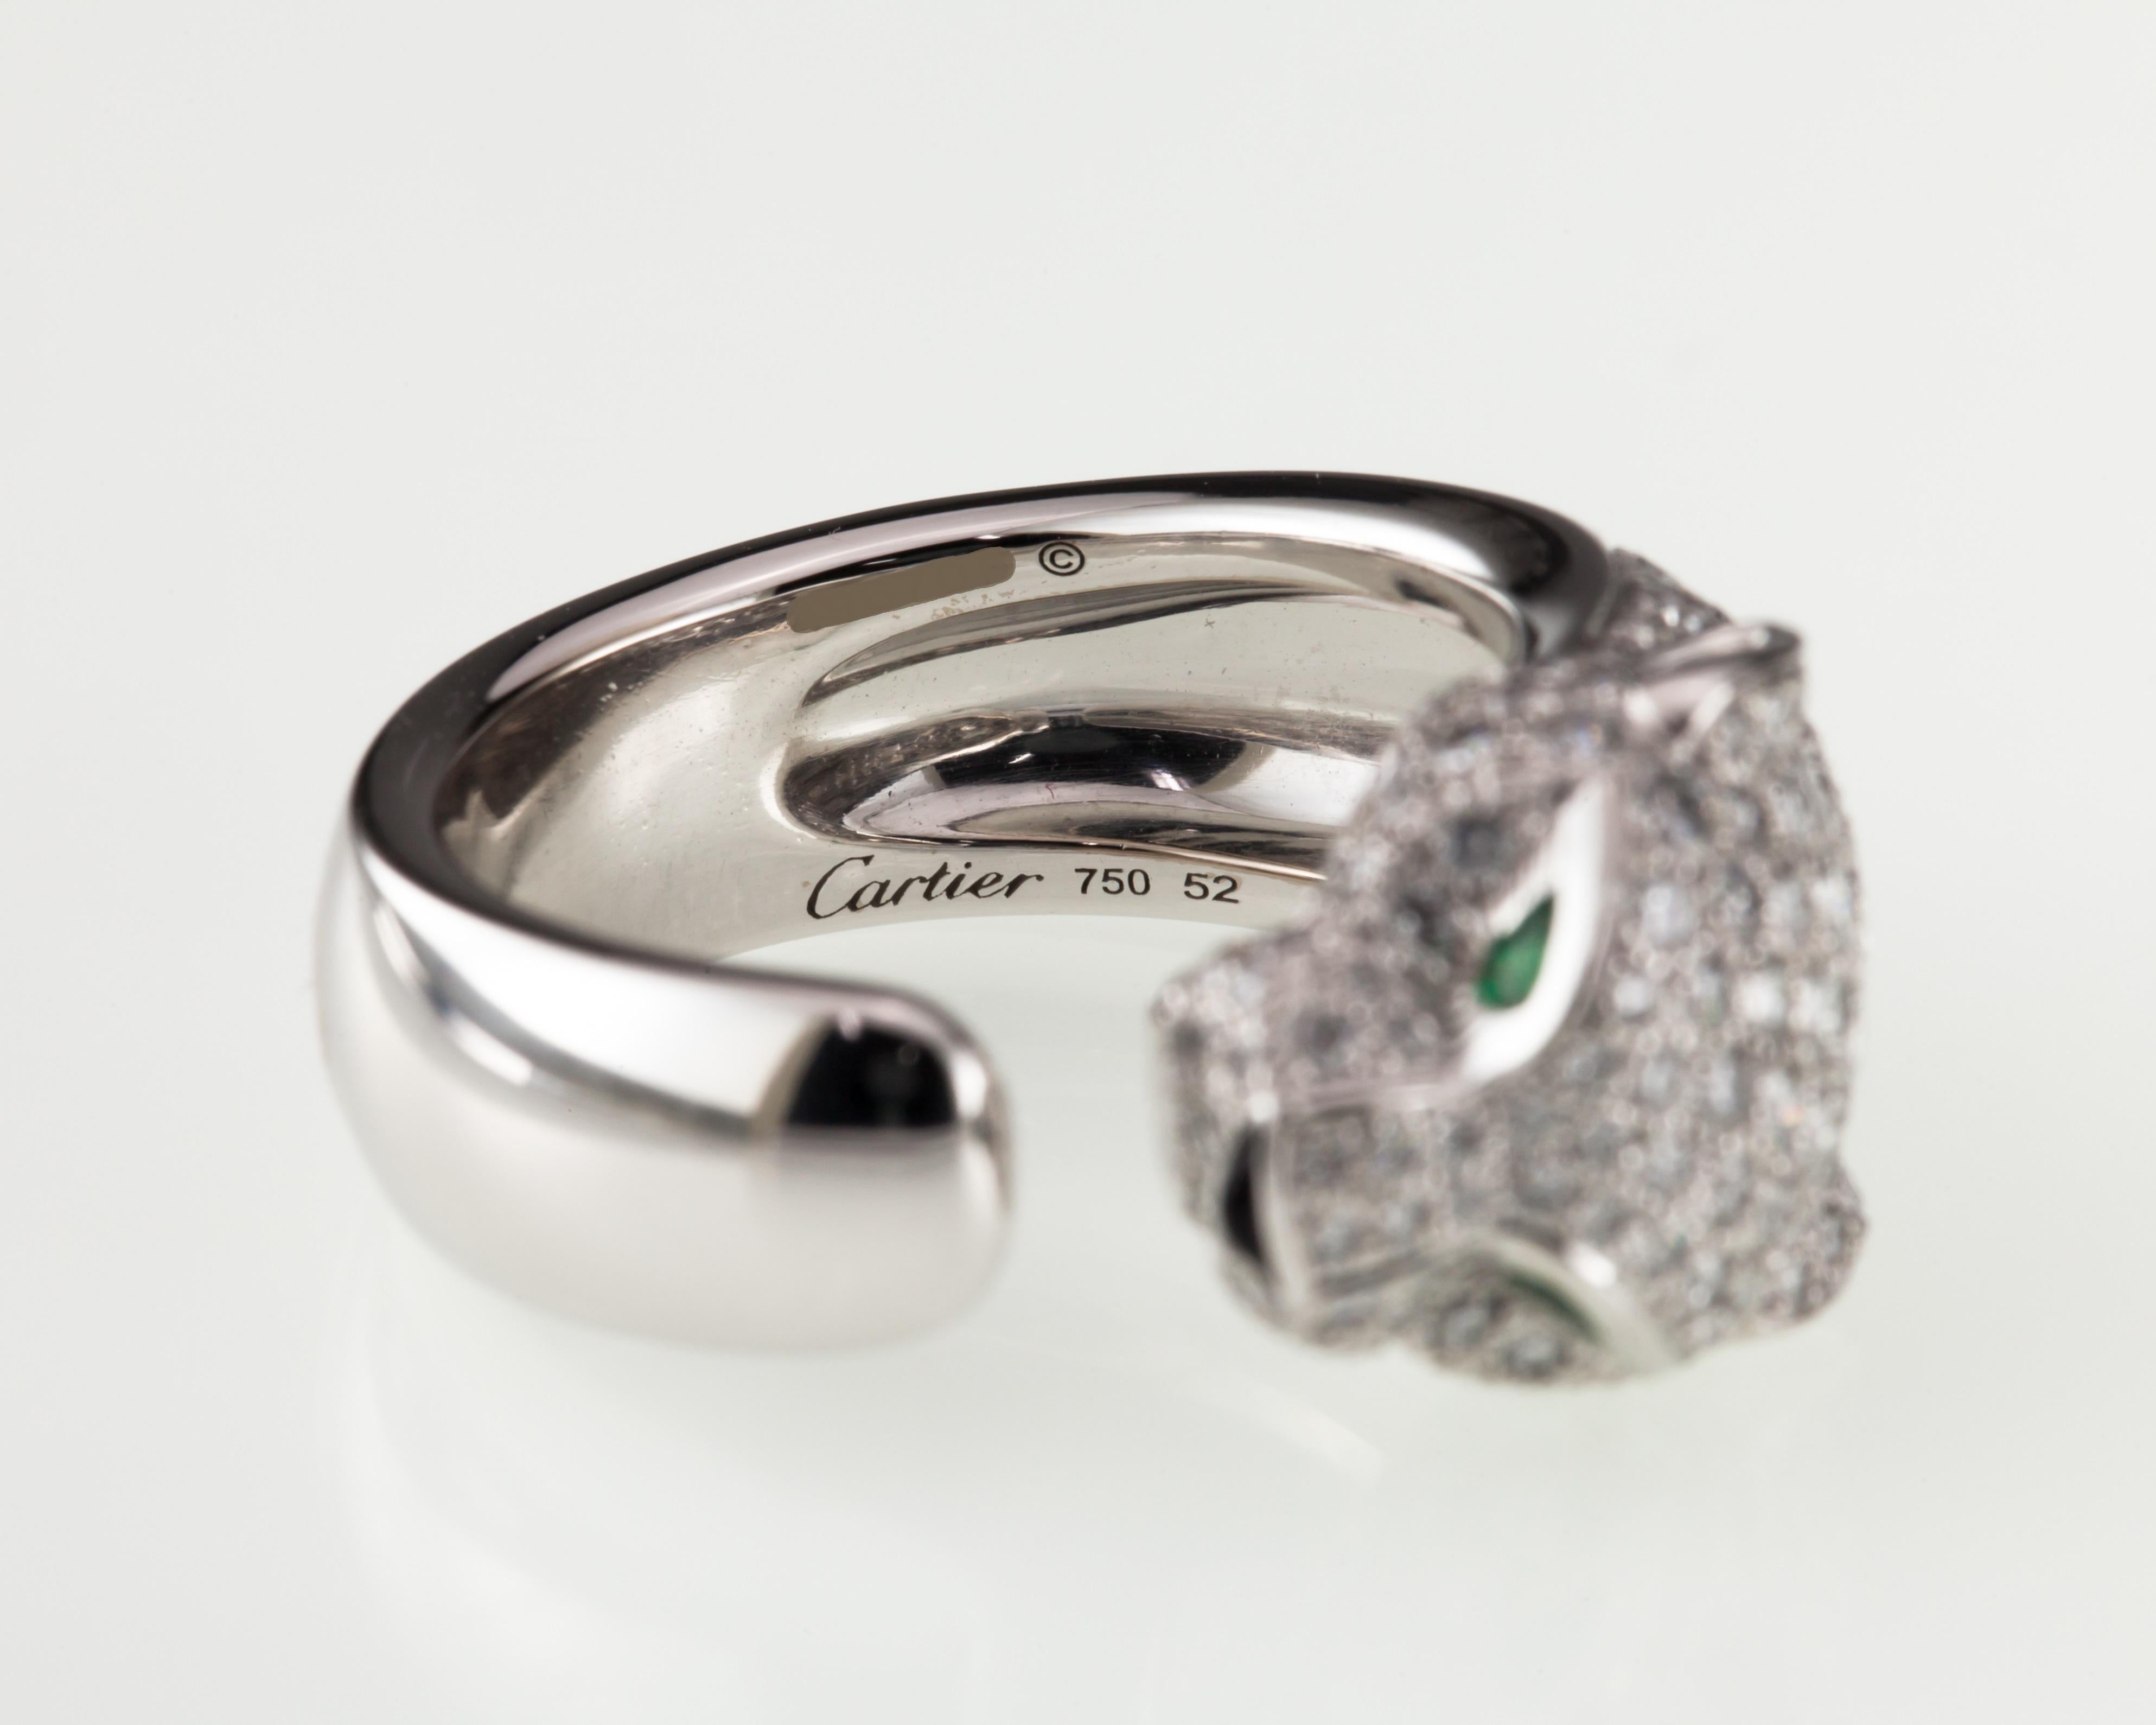 Modern Panthere de Cartier Diamond Band Ring w/ Emerald and Onyx in White Gold